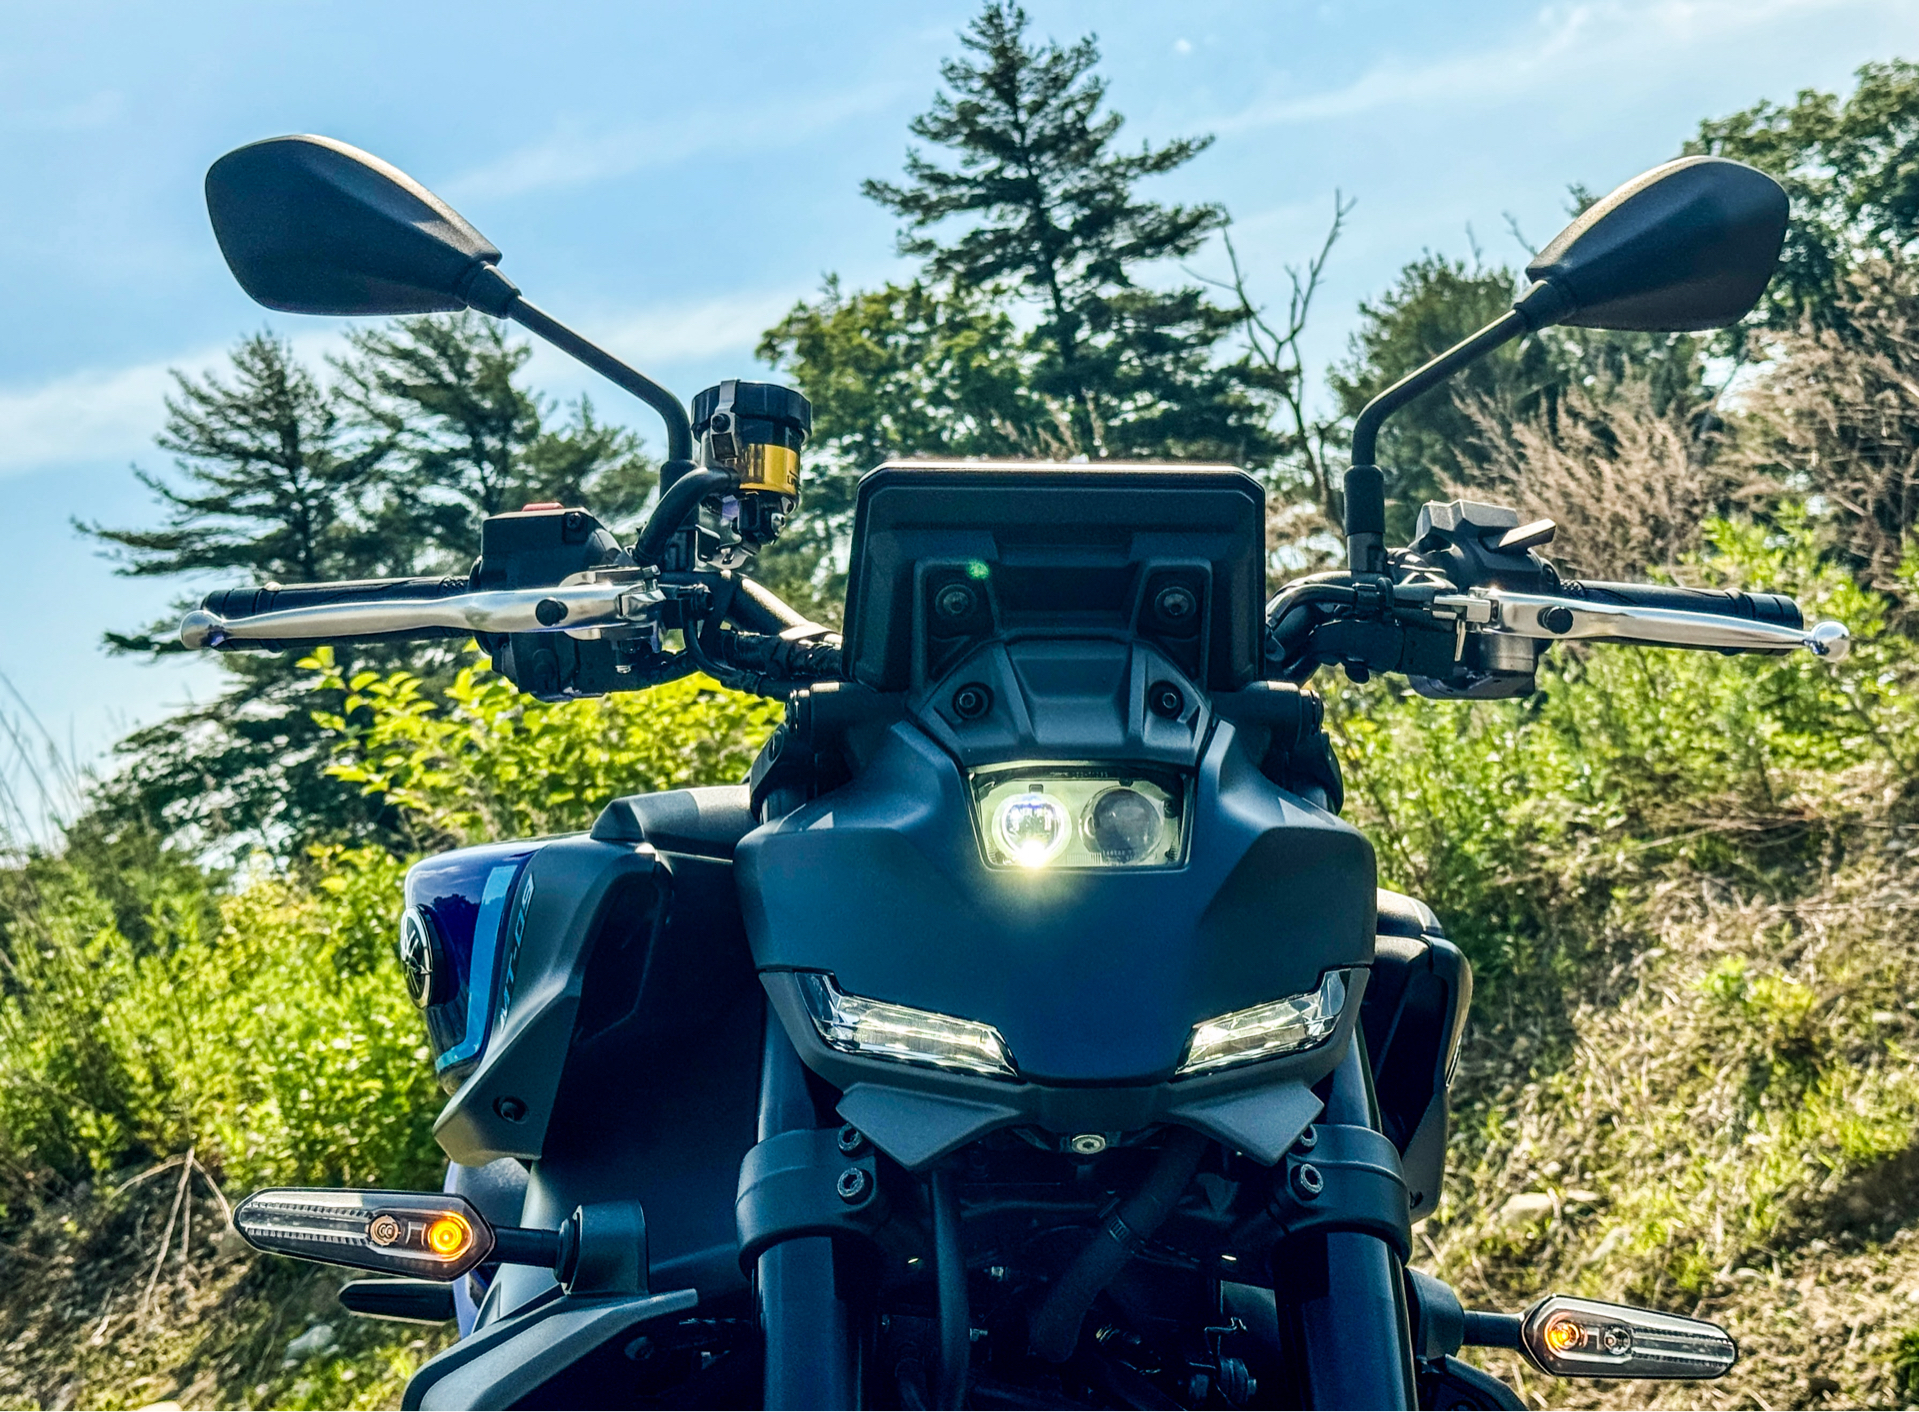 2024 Yamaha MT-09 in Manchester, New Hampshire - Photo 25